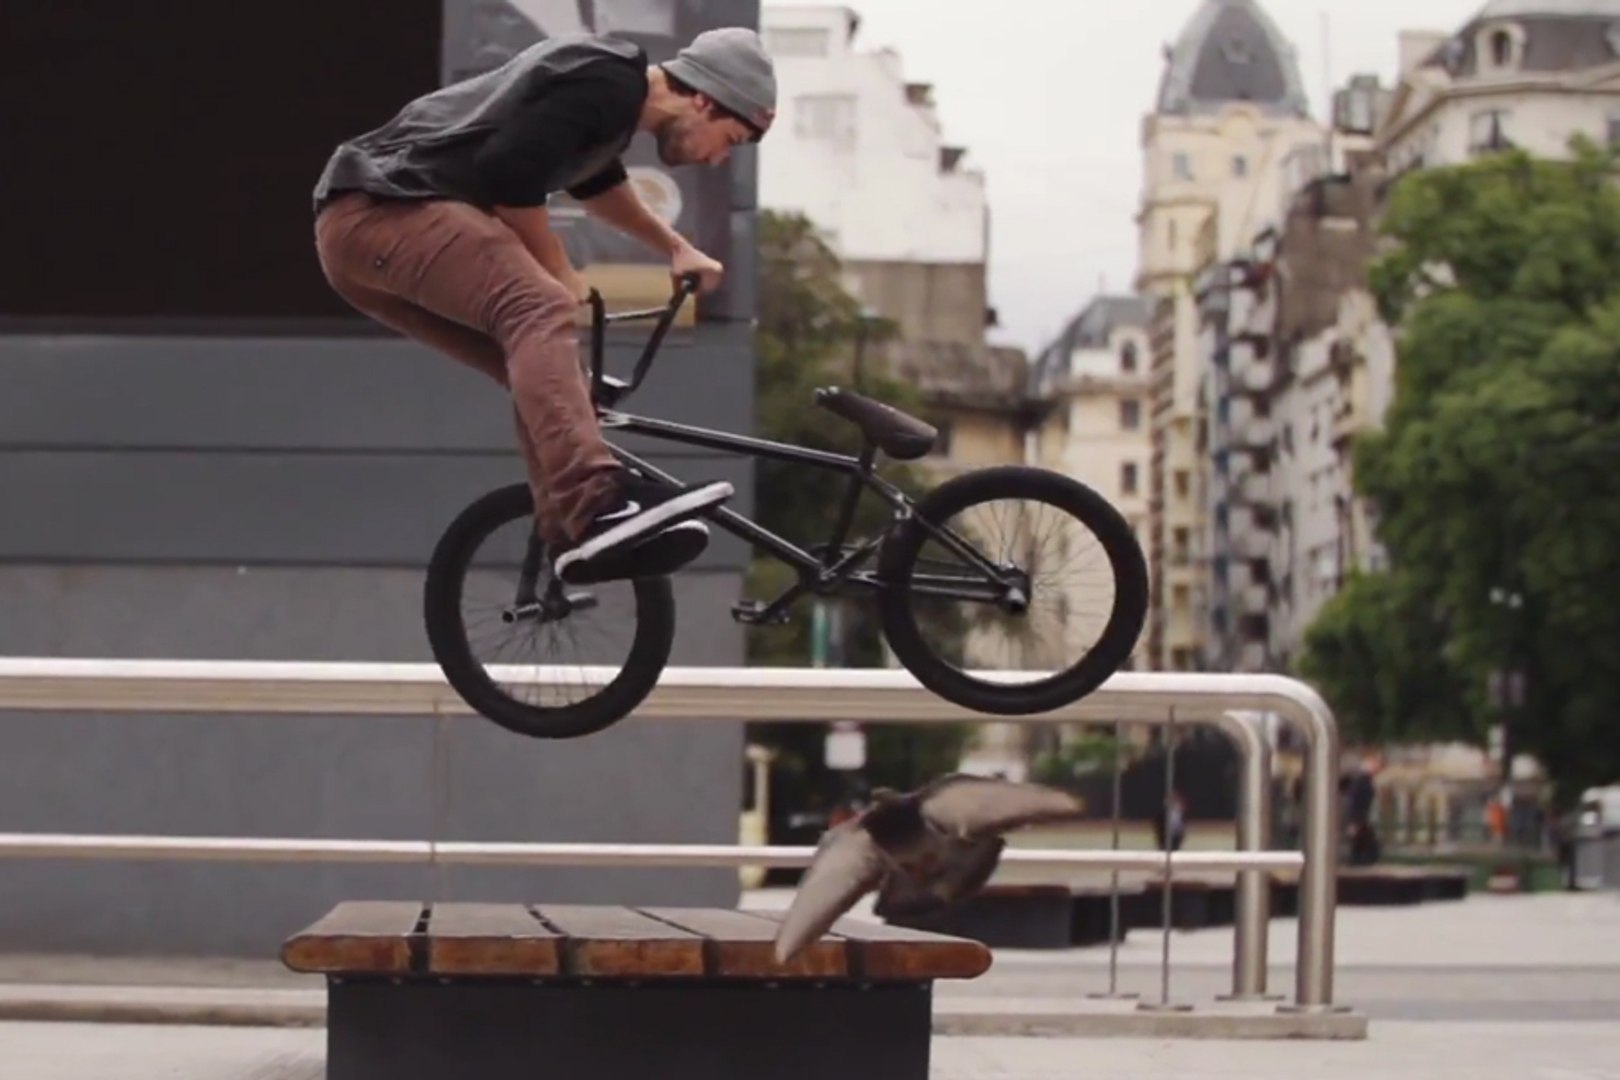 Nike BMX in Buenos Aires, Argentina - Vidéo Dailymotion